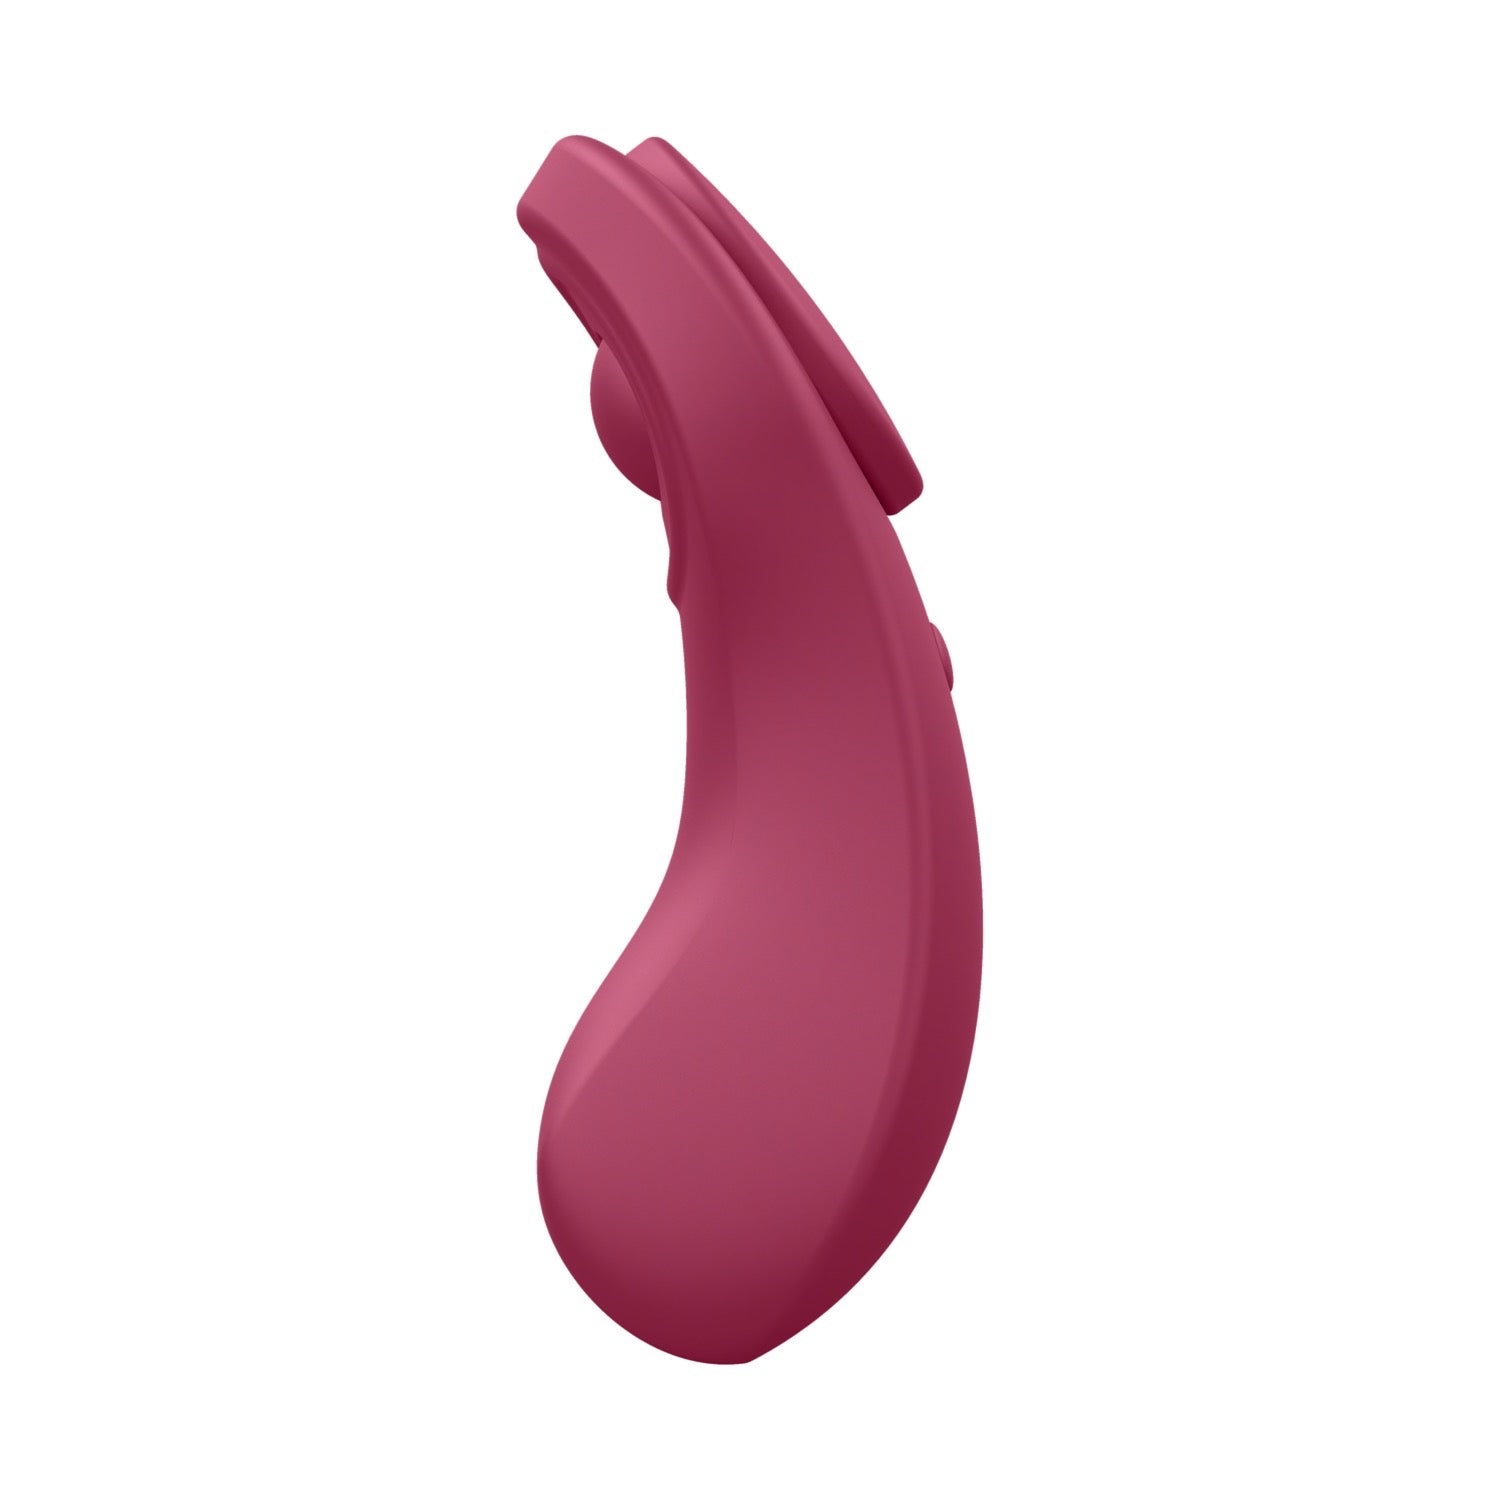 Satisfyer Sexy Secret - Red by Satisfyer